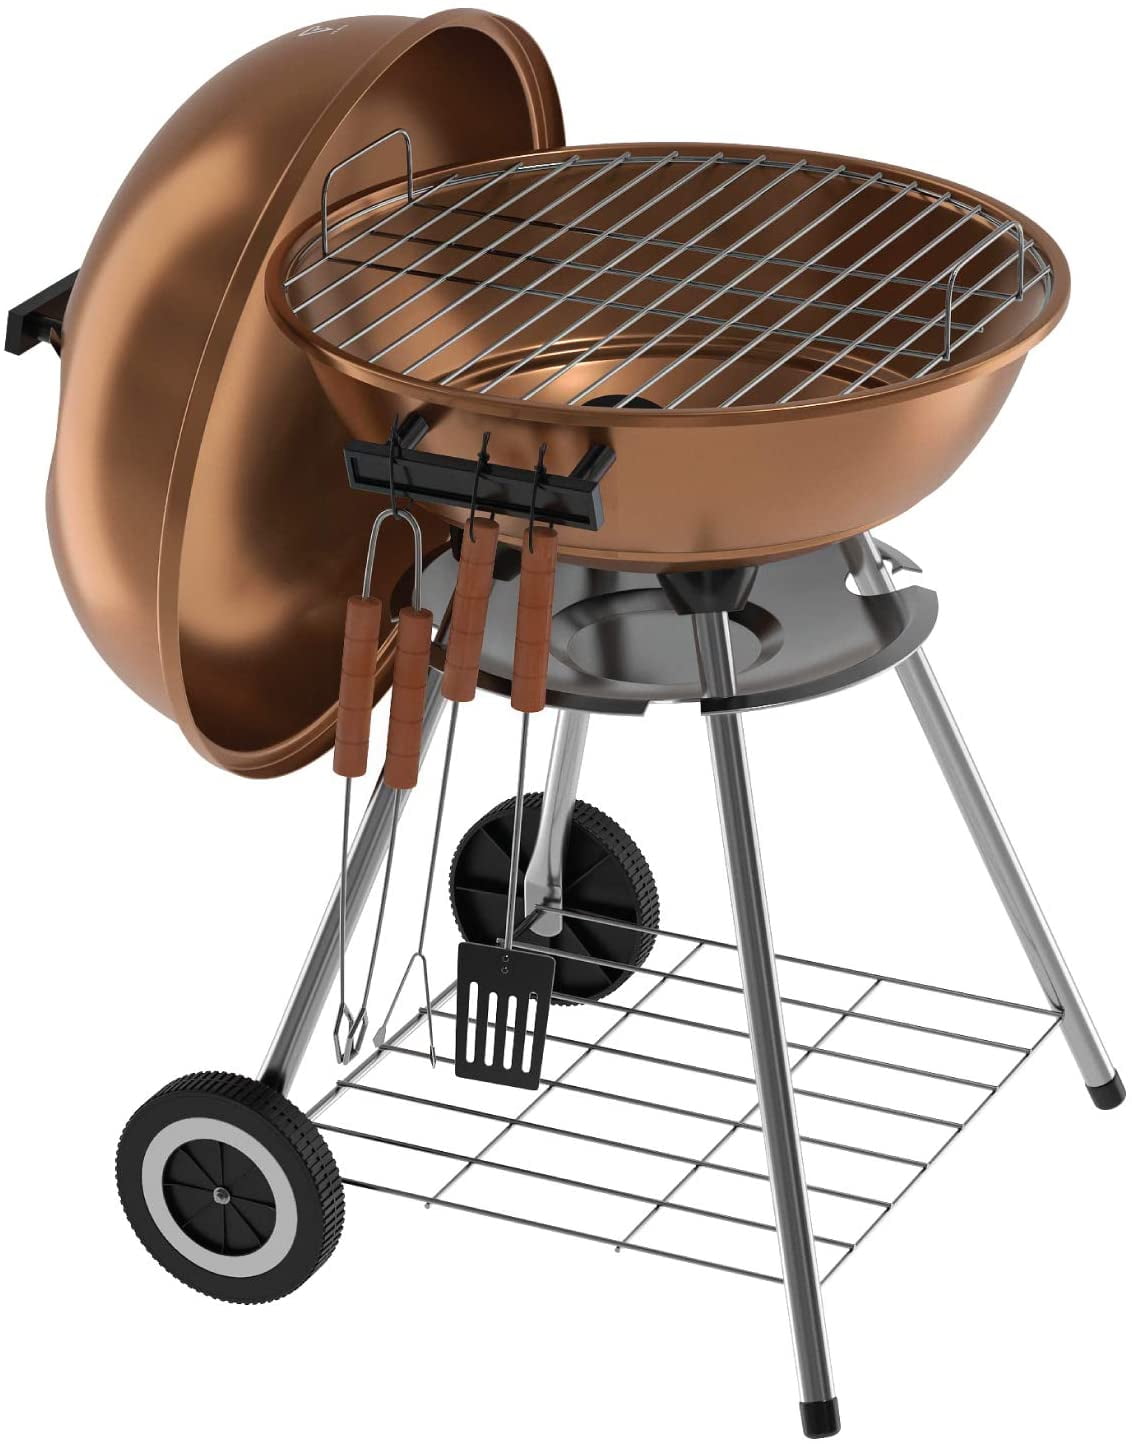 TUSY Charcoal Grill Carts Ceramic Original Kettle Premium 18-Inch Black Charcoal Barbecue Grill Camping Grilling Heat Control Steel Cooking Grate for Steak Chicken 